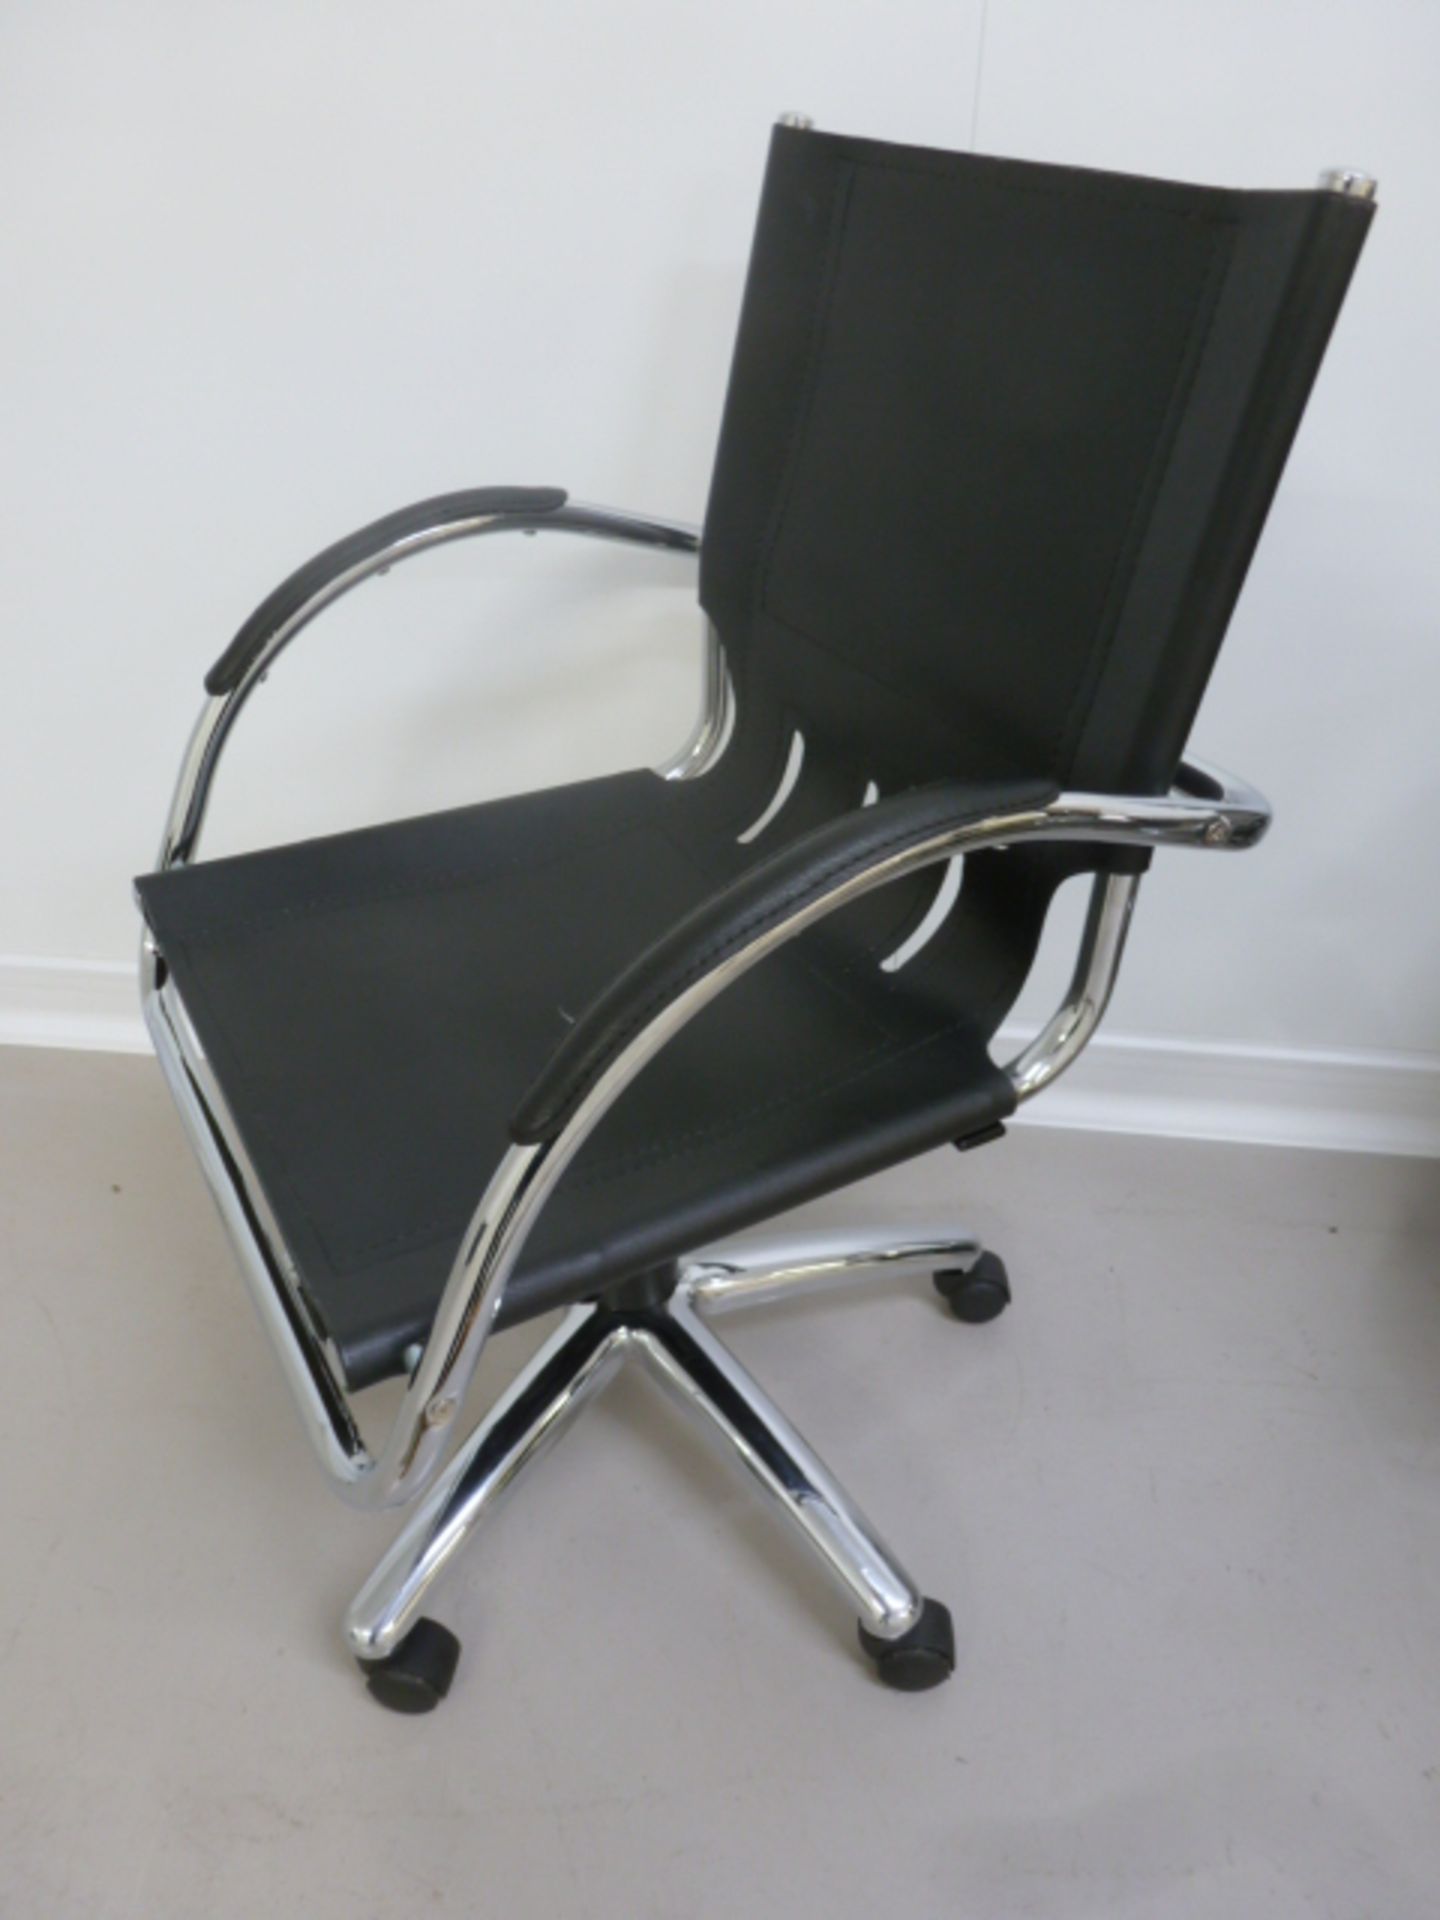 2 x Leather Office Swivel Chairs - Image 2 of 4